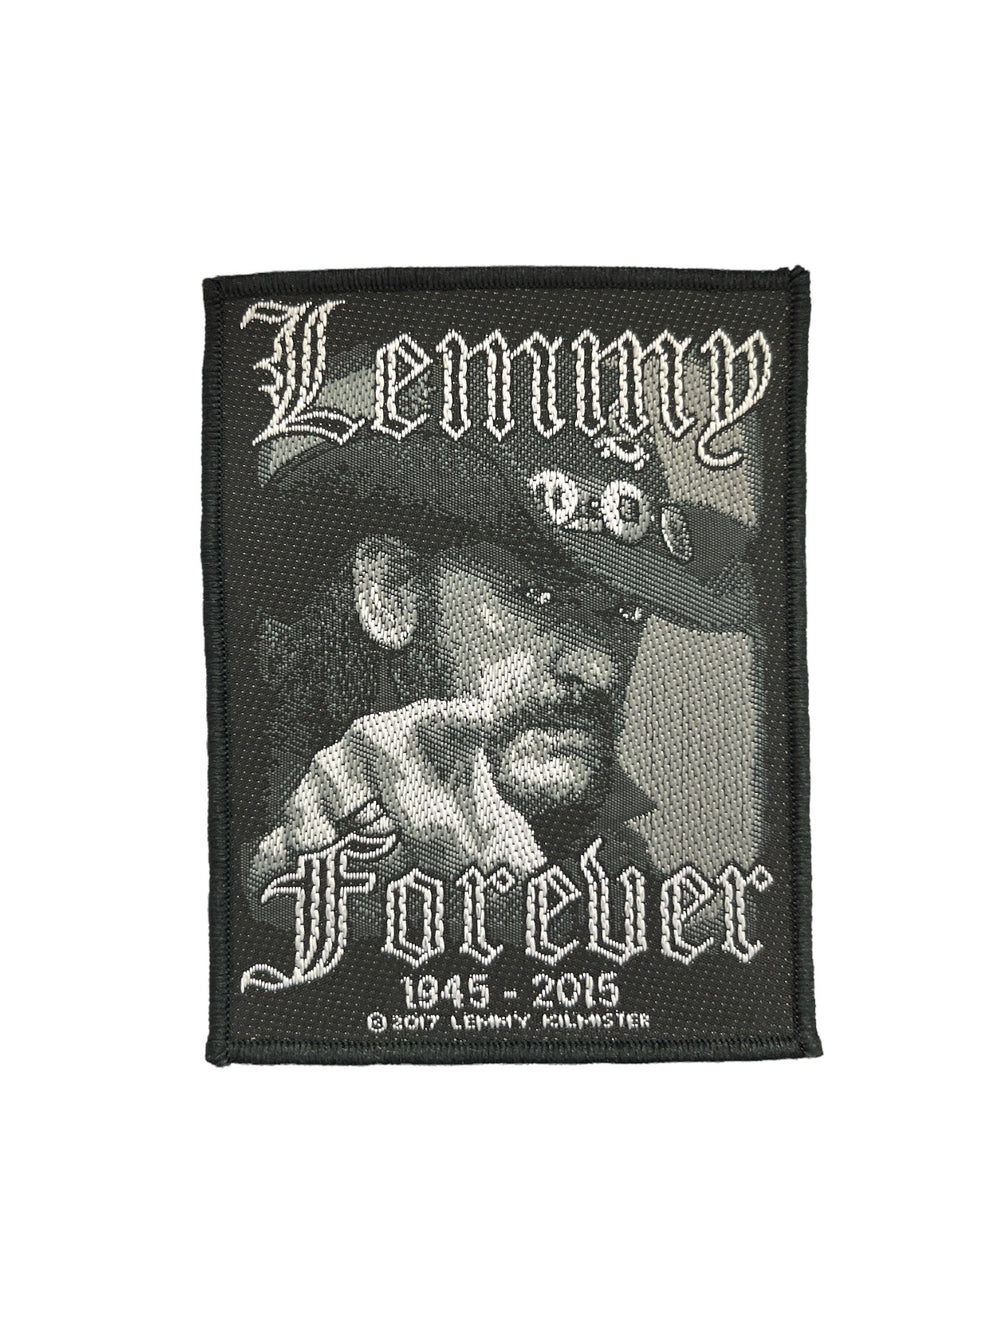 Motorhead Lemmy Forever Official Woven Patch Brand New